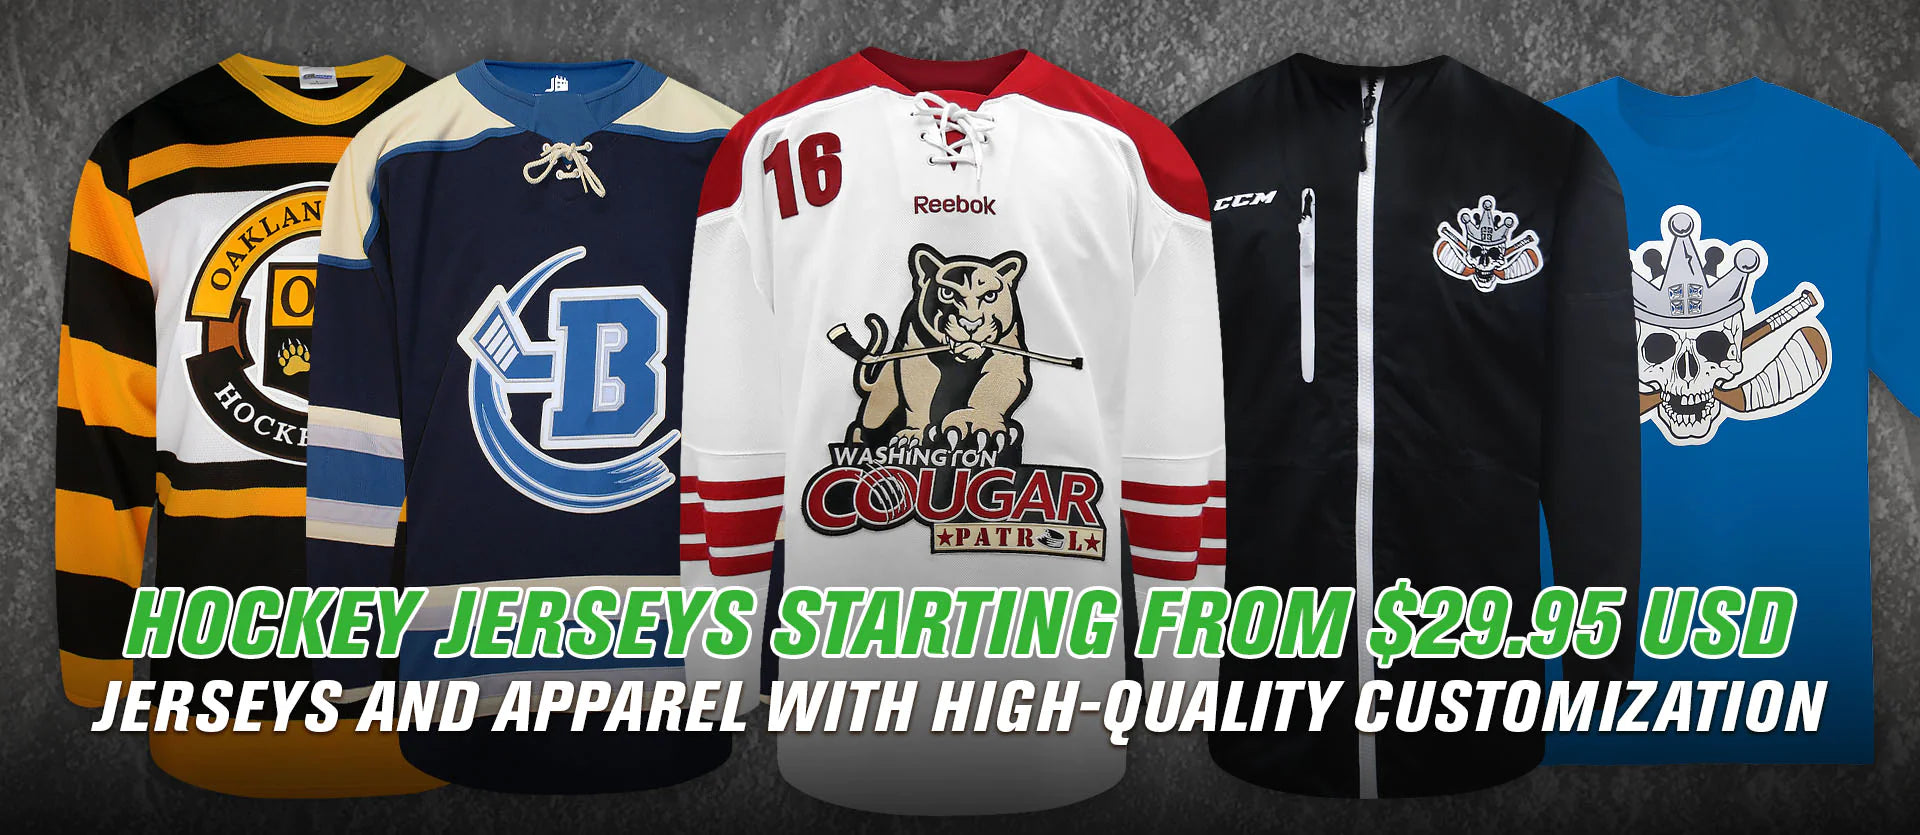 Cougars jersey collection appare